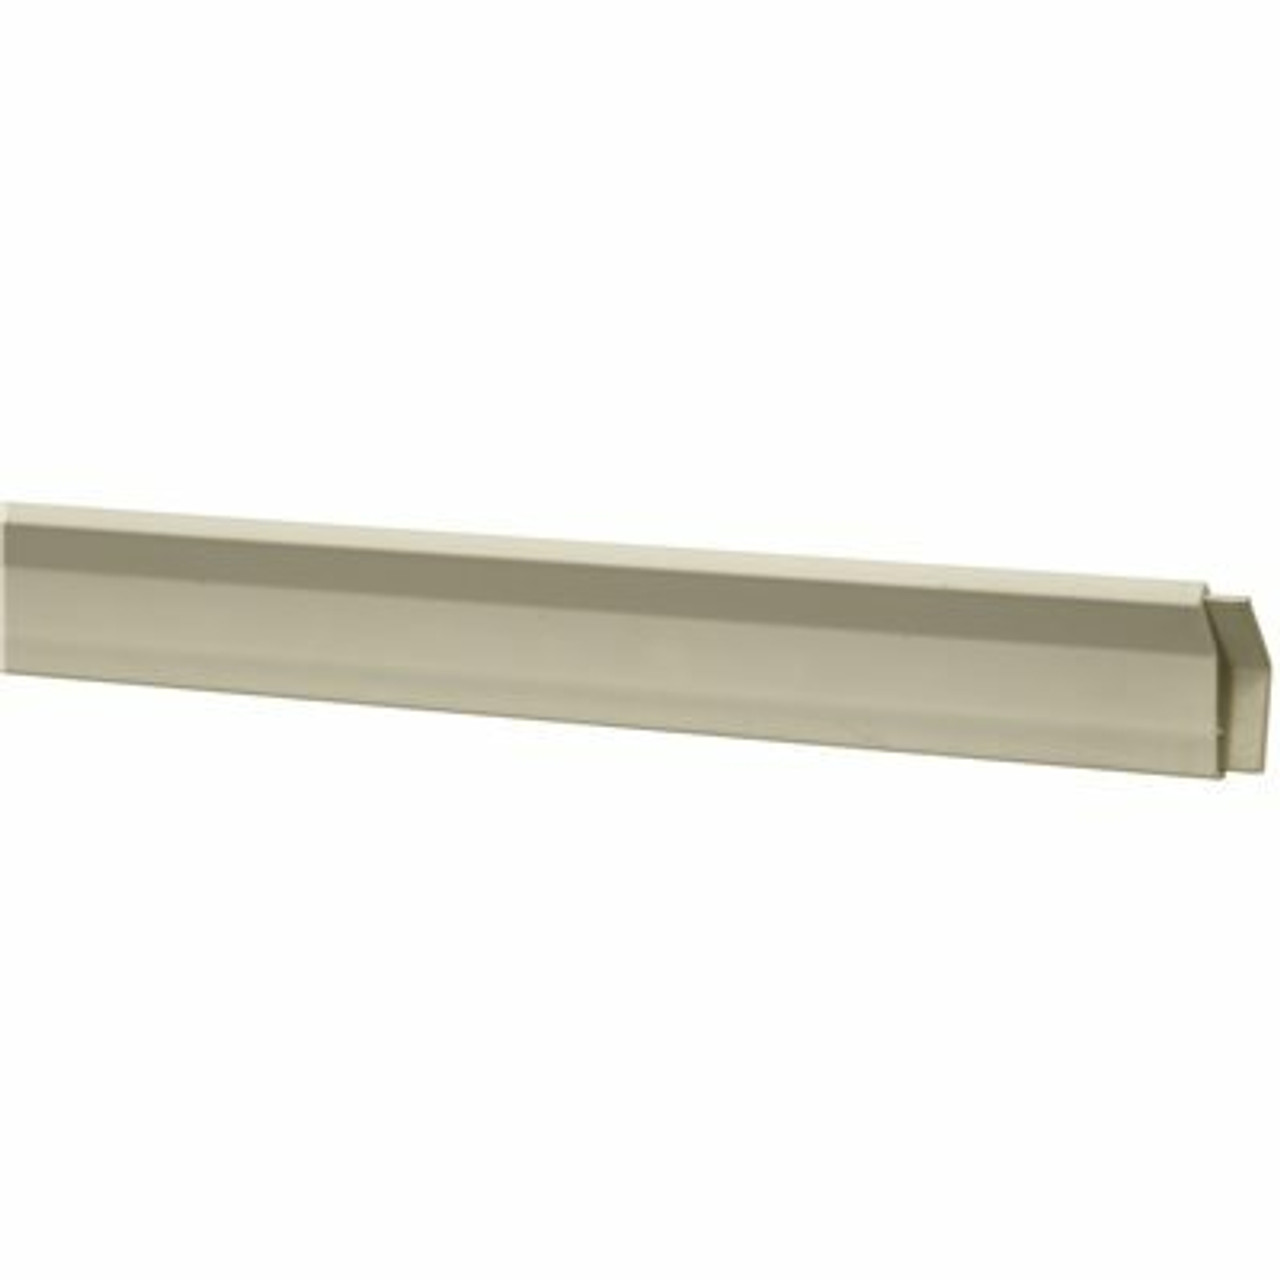 The Stow Company 24" Rail Cover